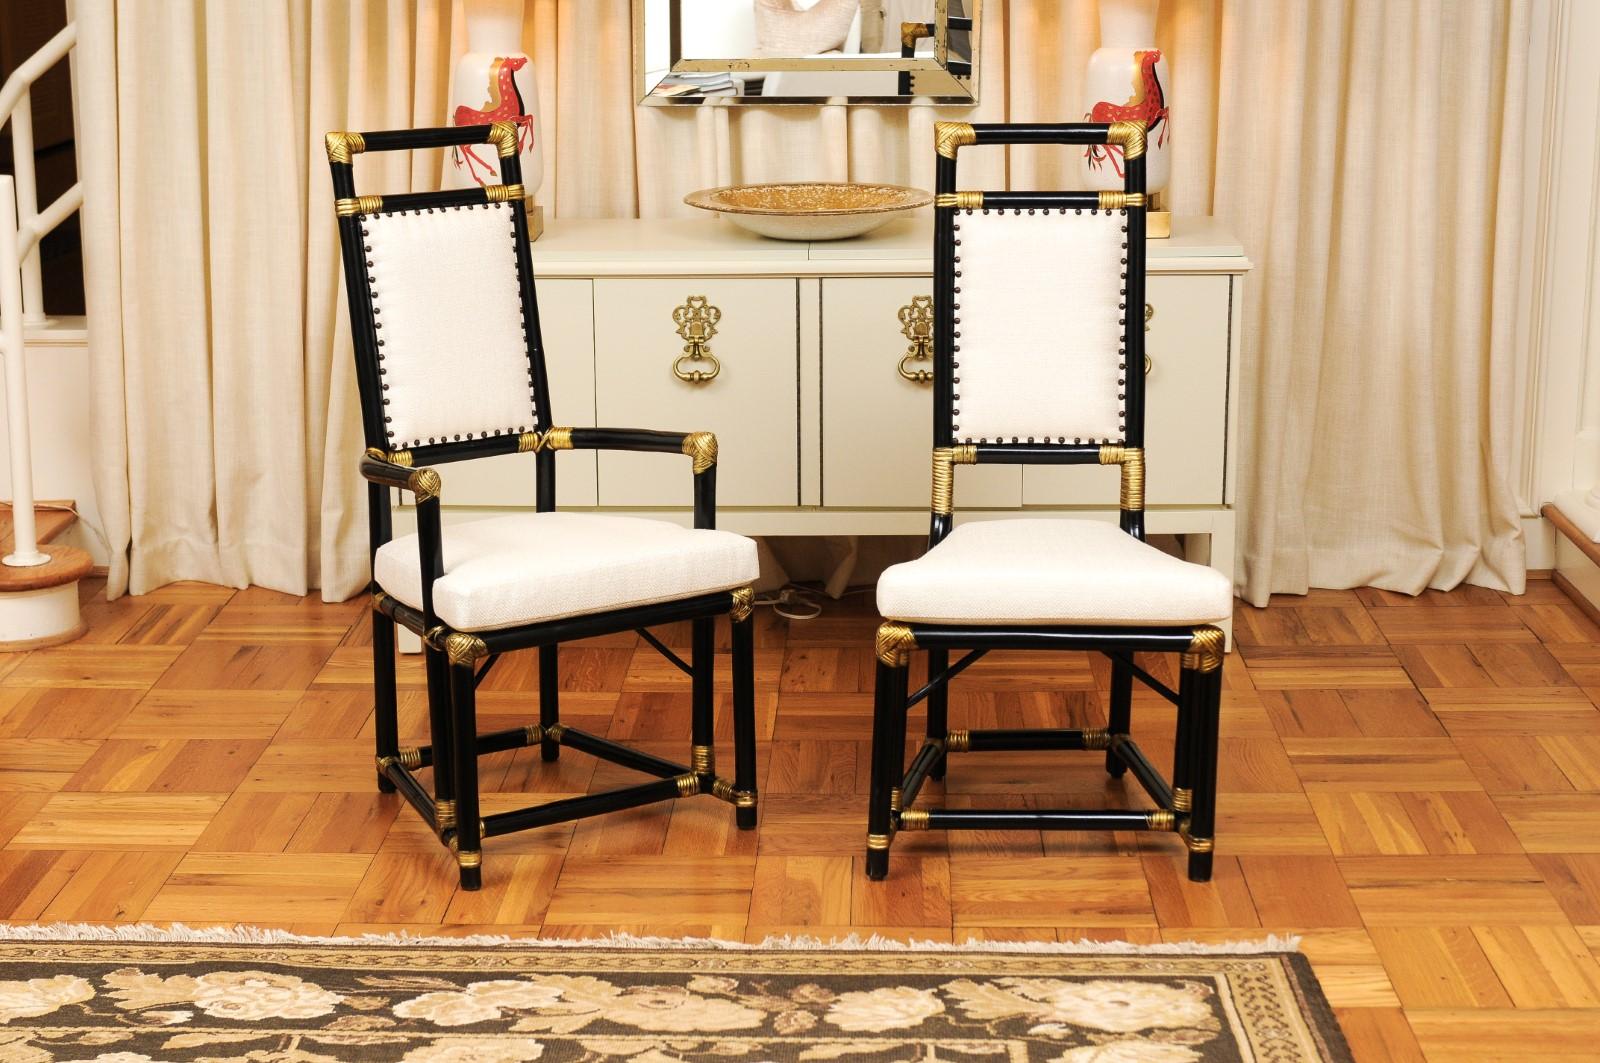 These magnificent dining chairs are shipped as professionally photographed and described in the listing: meticulously professionally restored, expertly upholstered and completely installation ready. This large set of impossible to find examples is